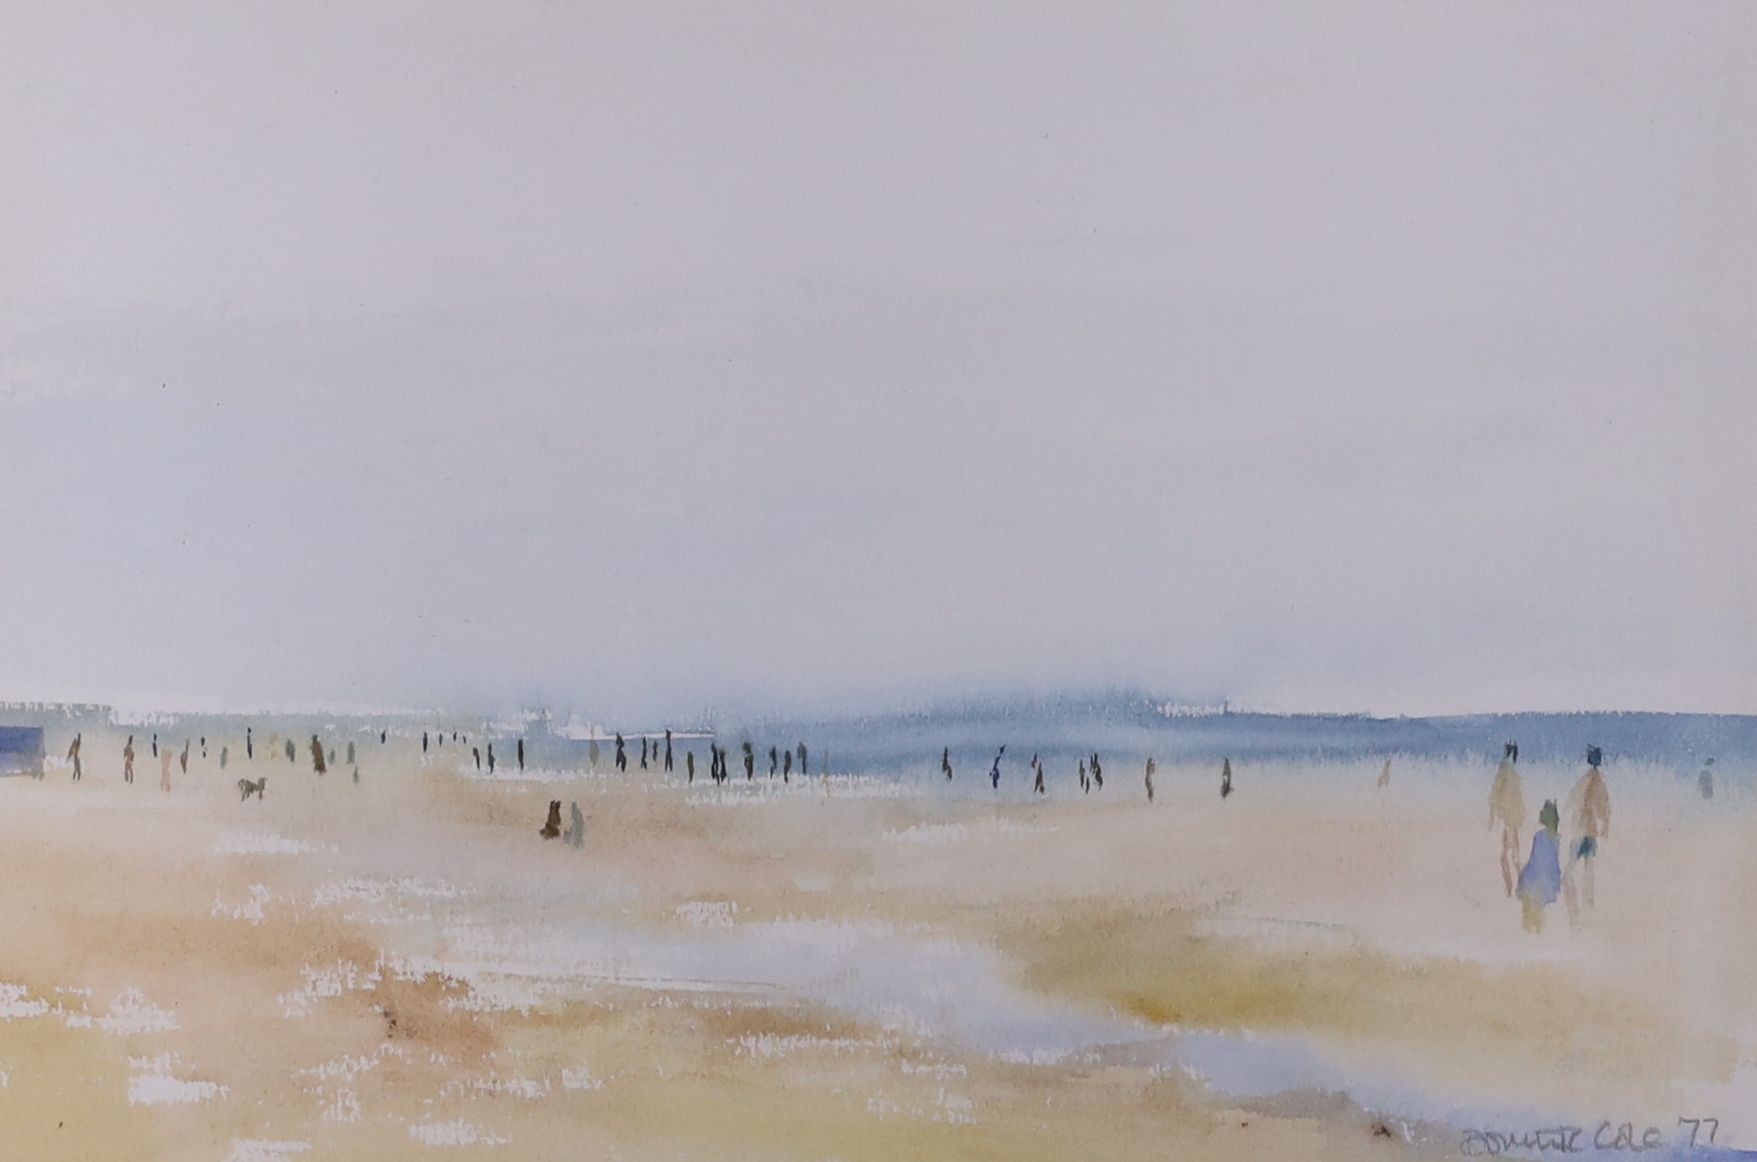 Dominic Cole, watercolour, Beach scene, signed and dated 1977, 20 x 30cm